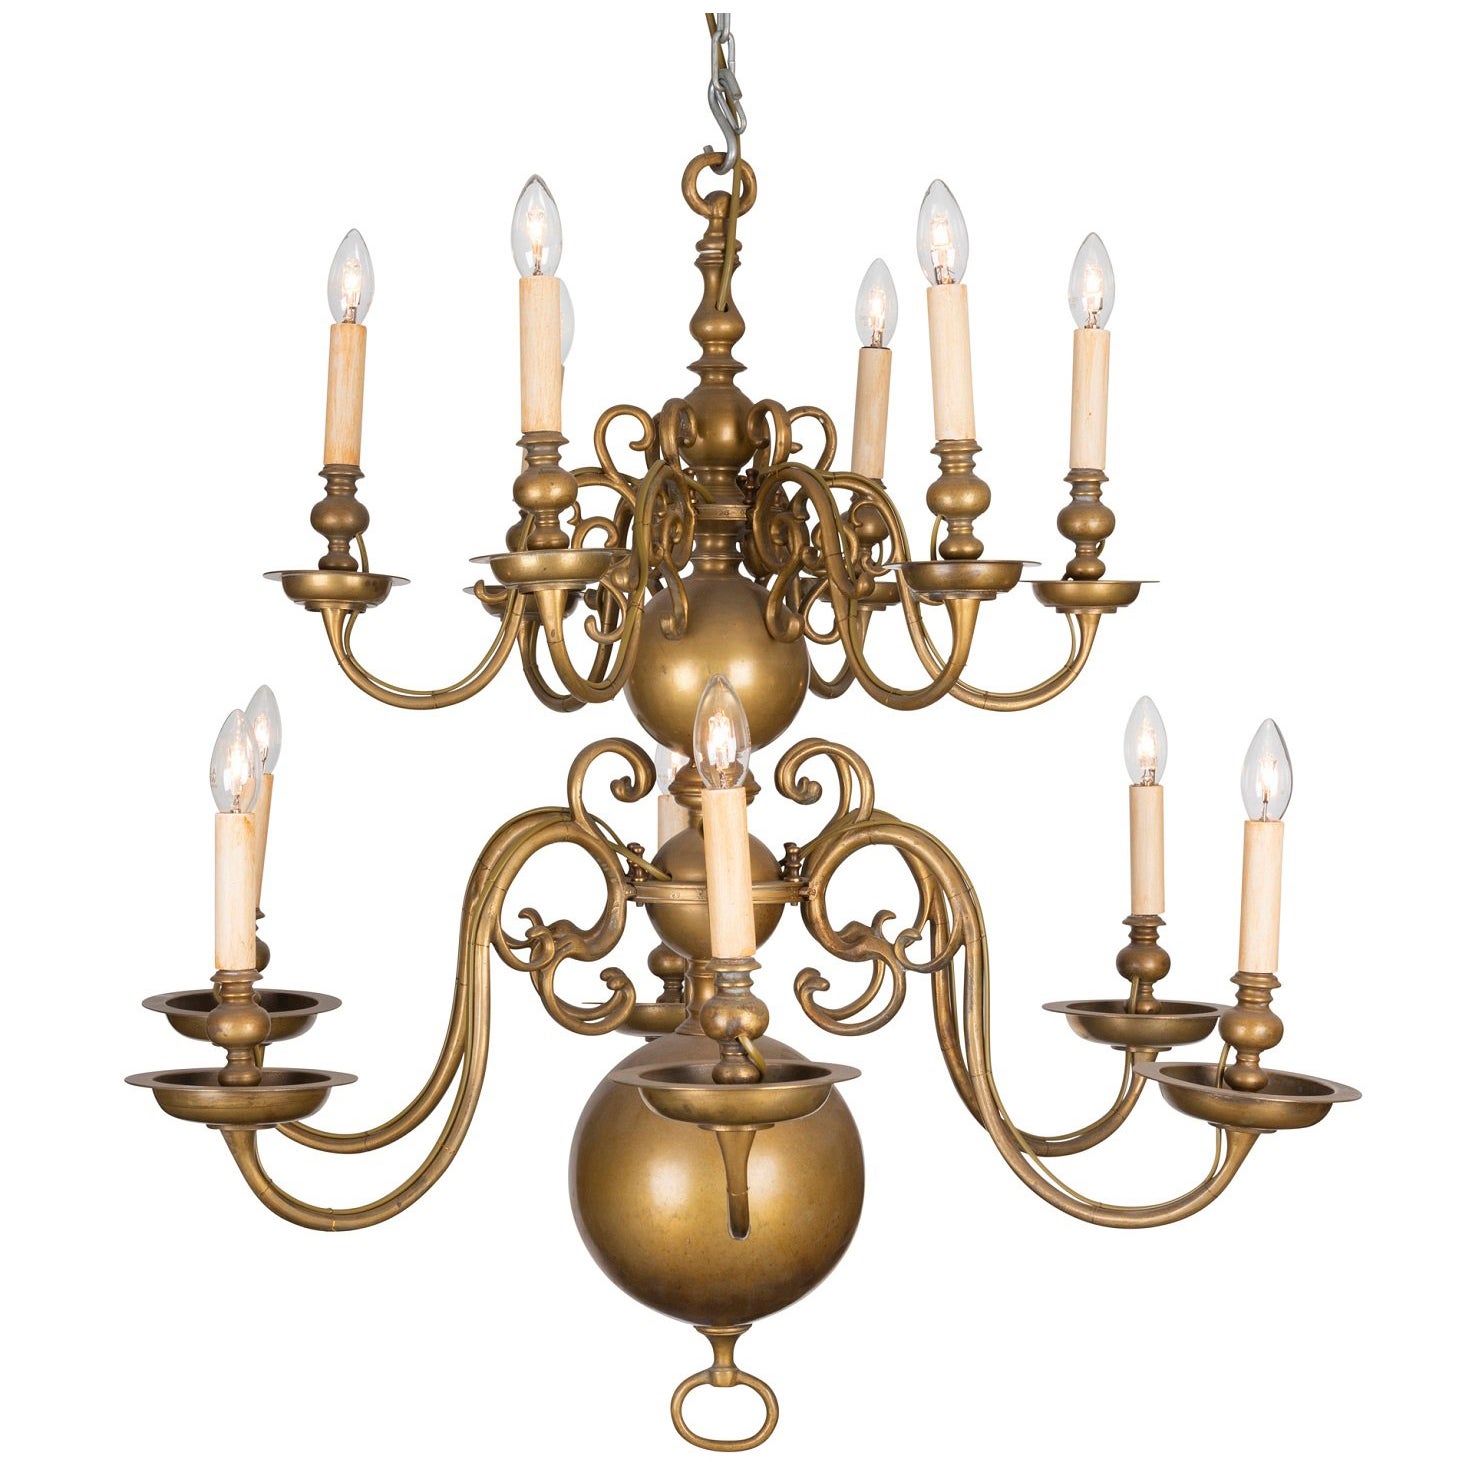 Brass French Twelve Candle Williamsburg Style Chandelier at 1stDibs